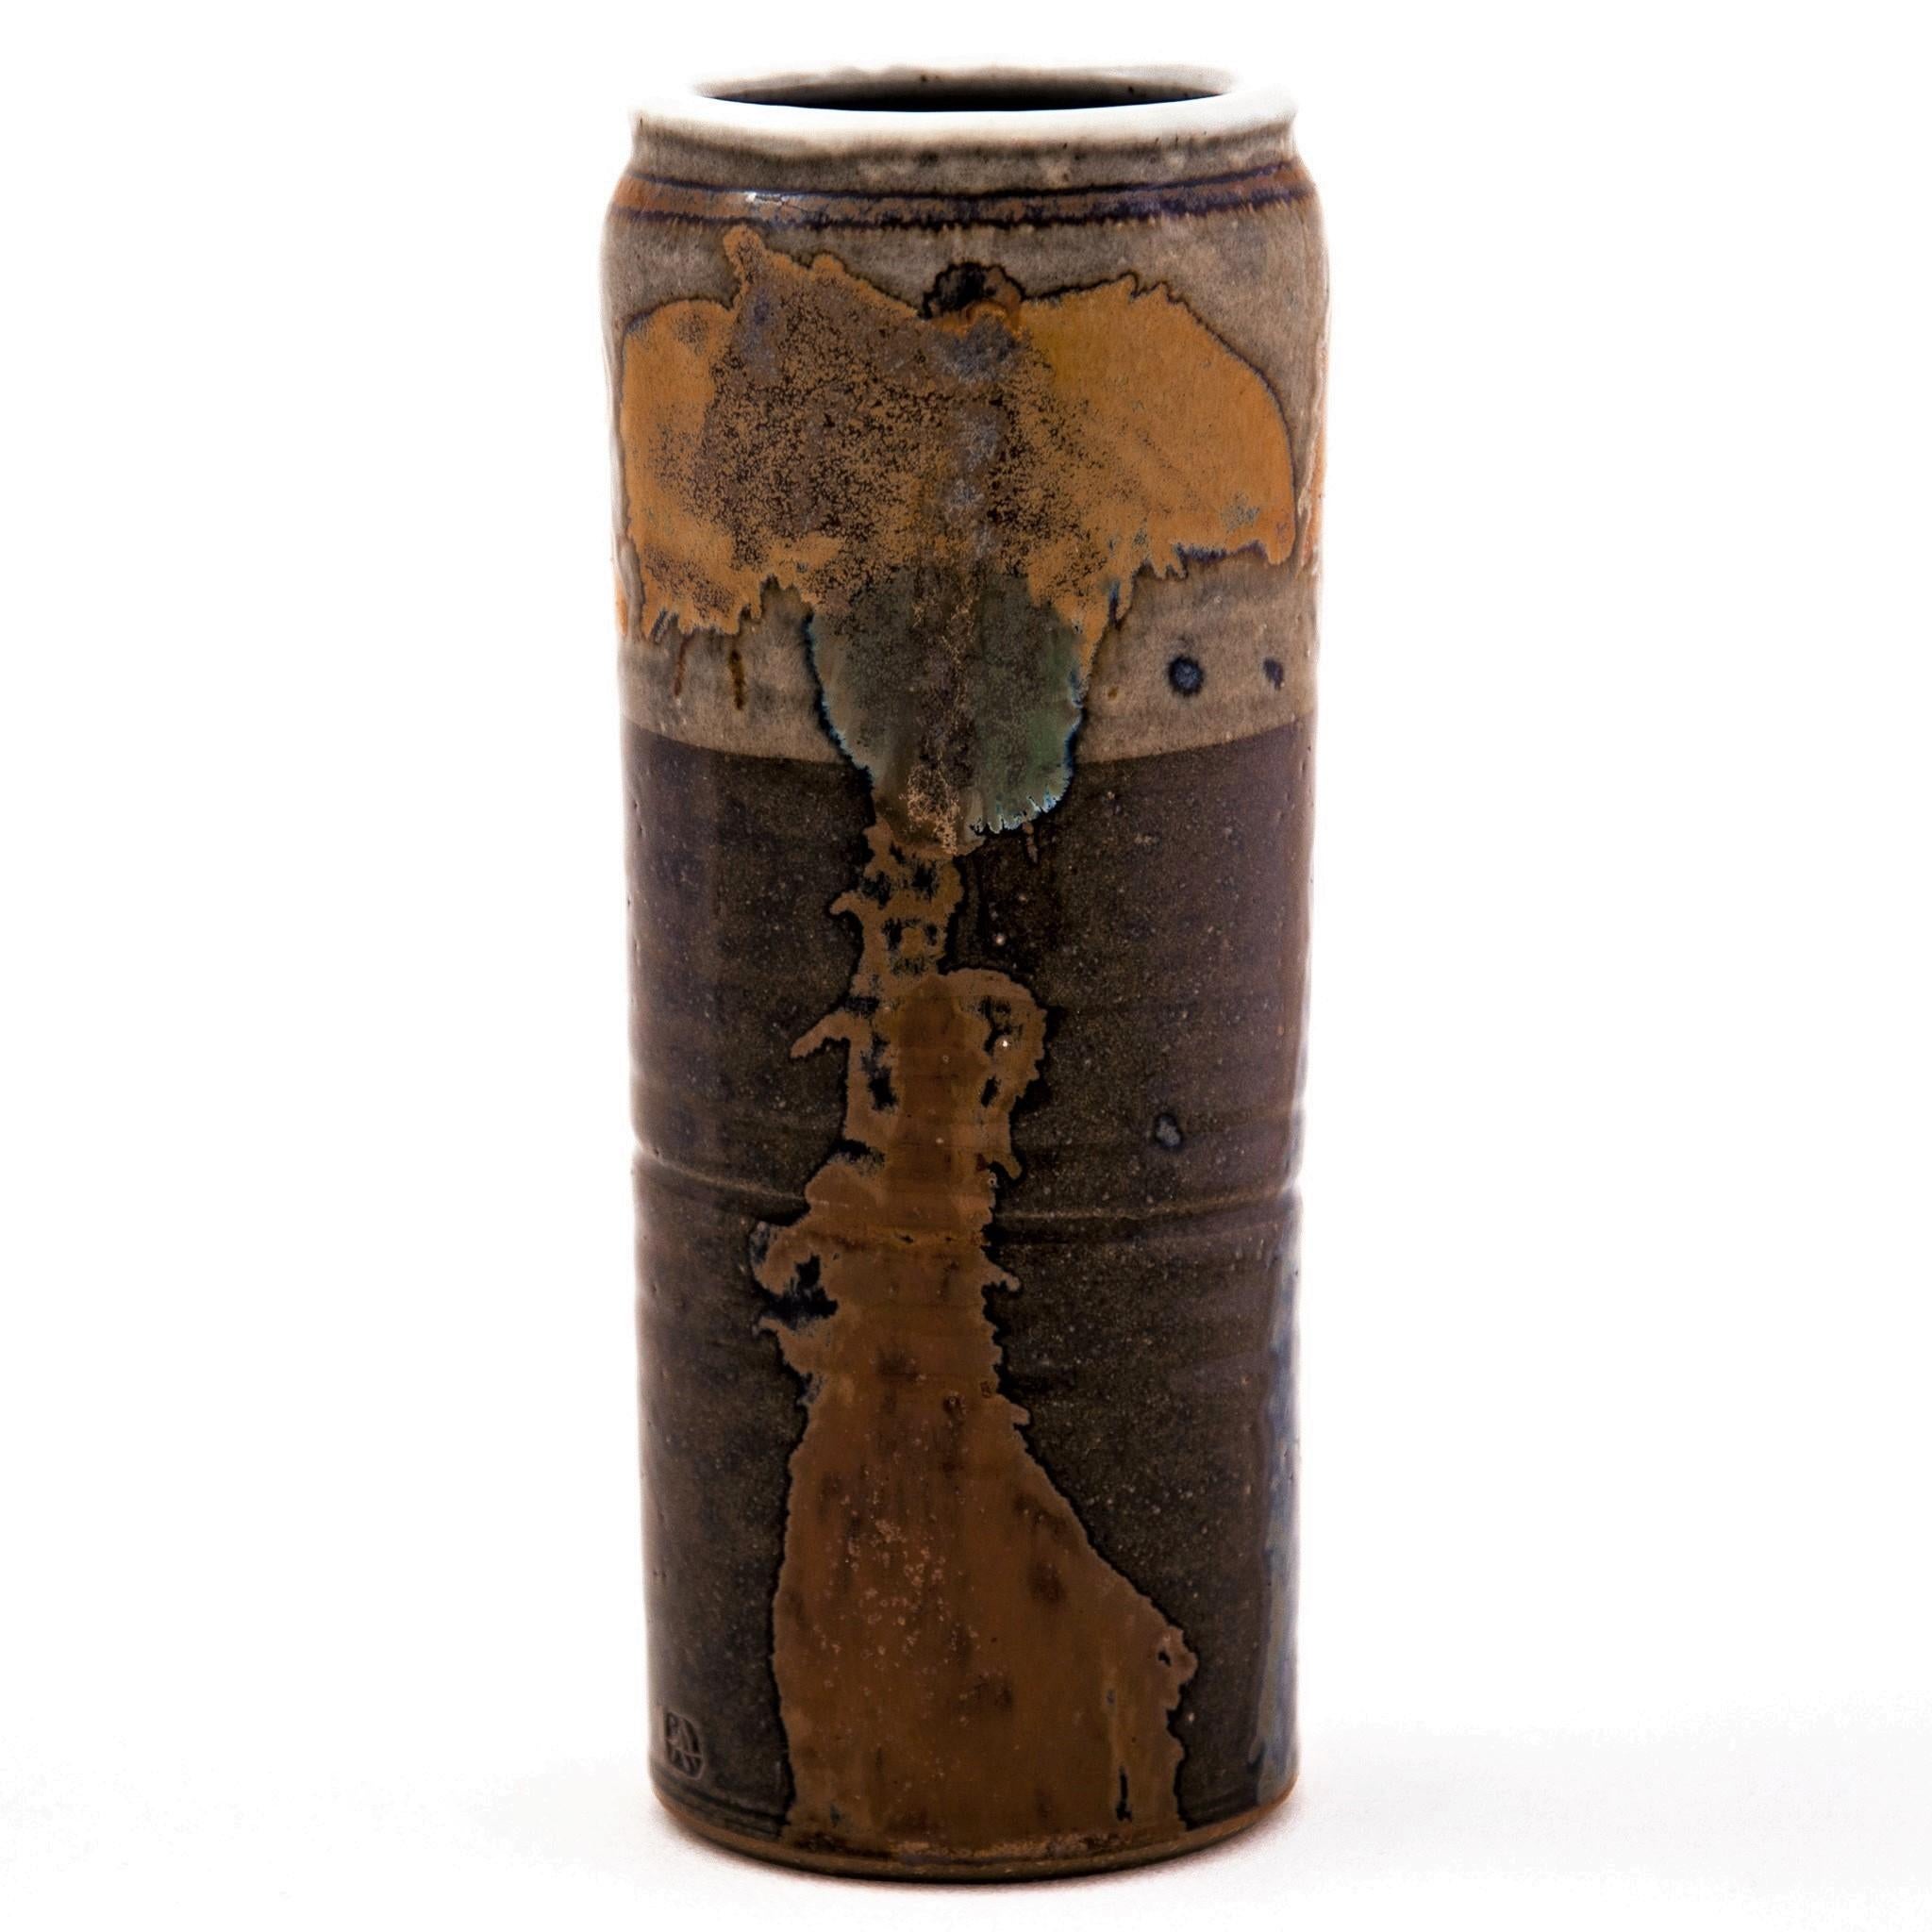 Vintage cylindrical thrown stoneware vase depicting three abstract trees glazed with deep earth tones by Sinclair W. Ashley (1942-1997). The glaze colors include dark brown, burnt orange and moss green with a light gray rim and interior. It is